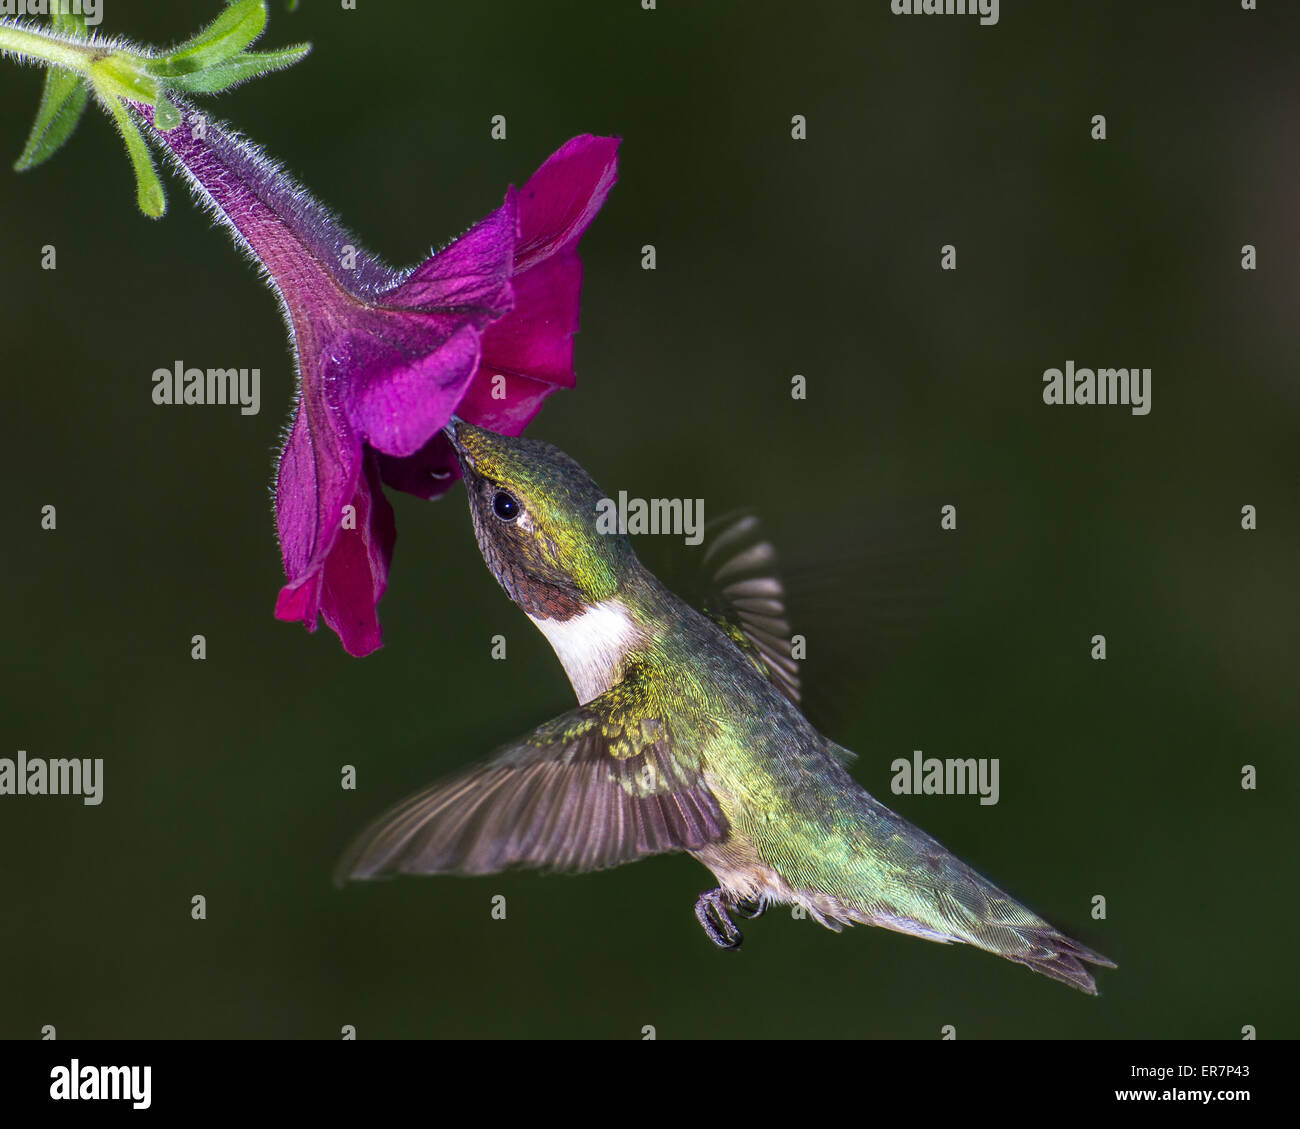 A ruby-throated hummingbird gathering nectar from a flower. Stock Photo